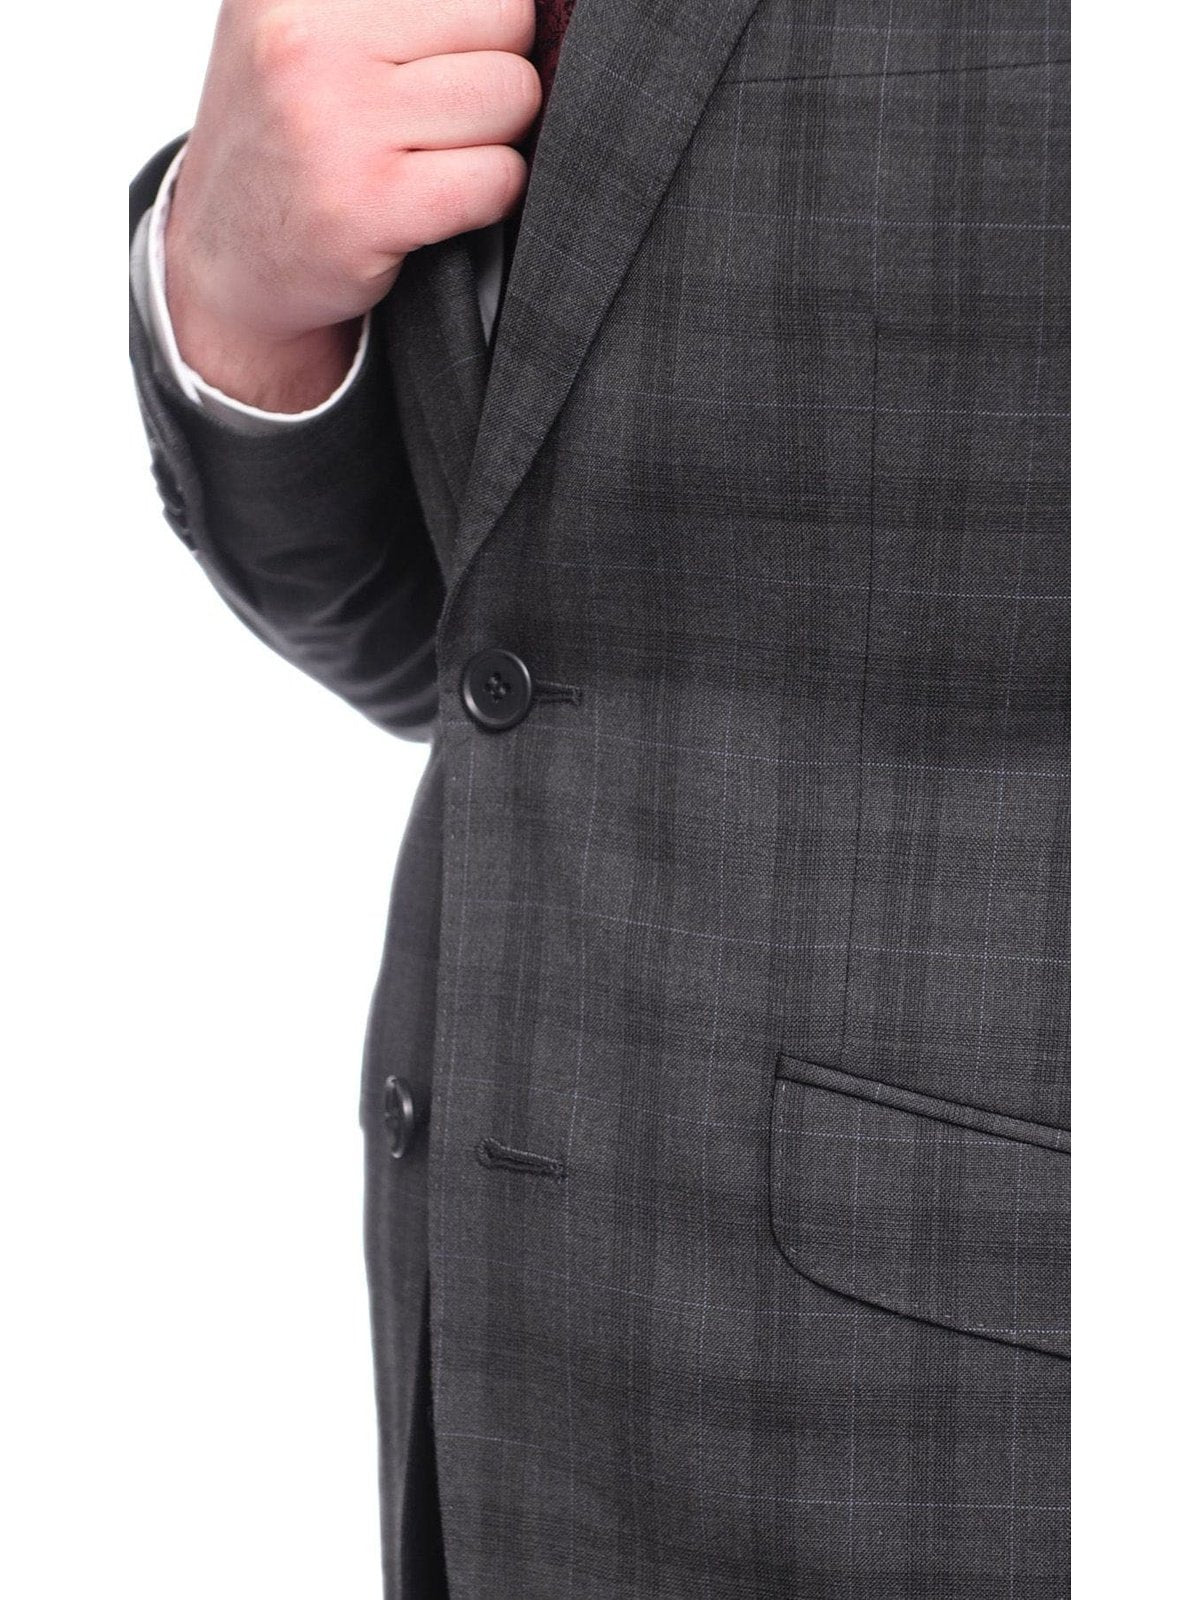 Ideal TWO PIECE SUITS Ideal Slim Fit Gray Plaid Windowpane Two Button Wool Suit With Peak Lapels